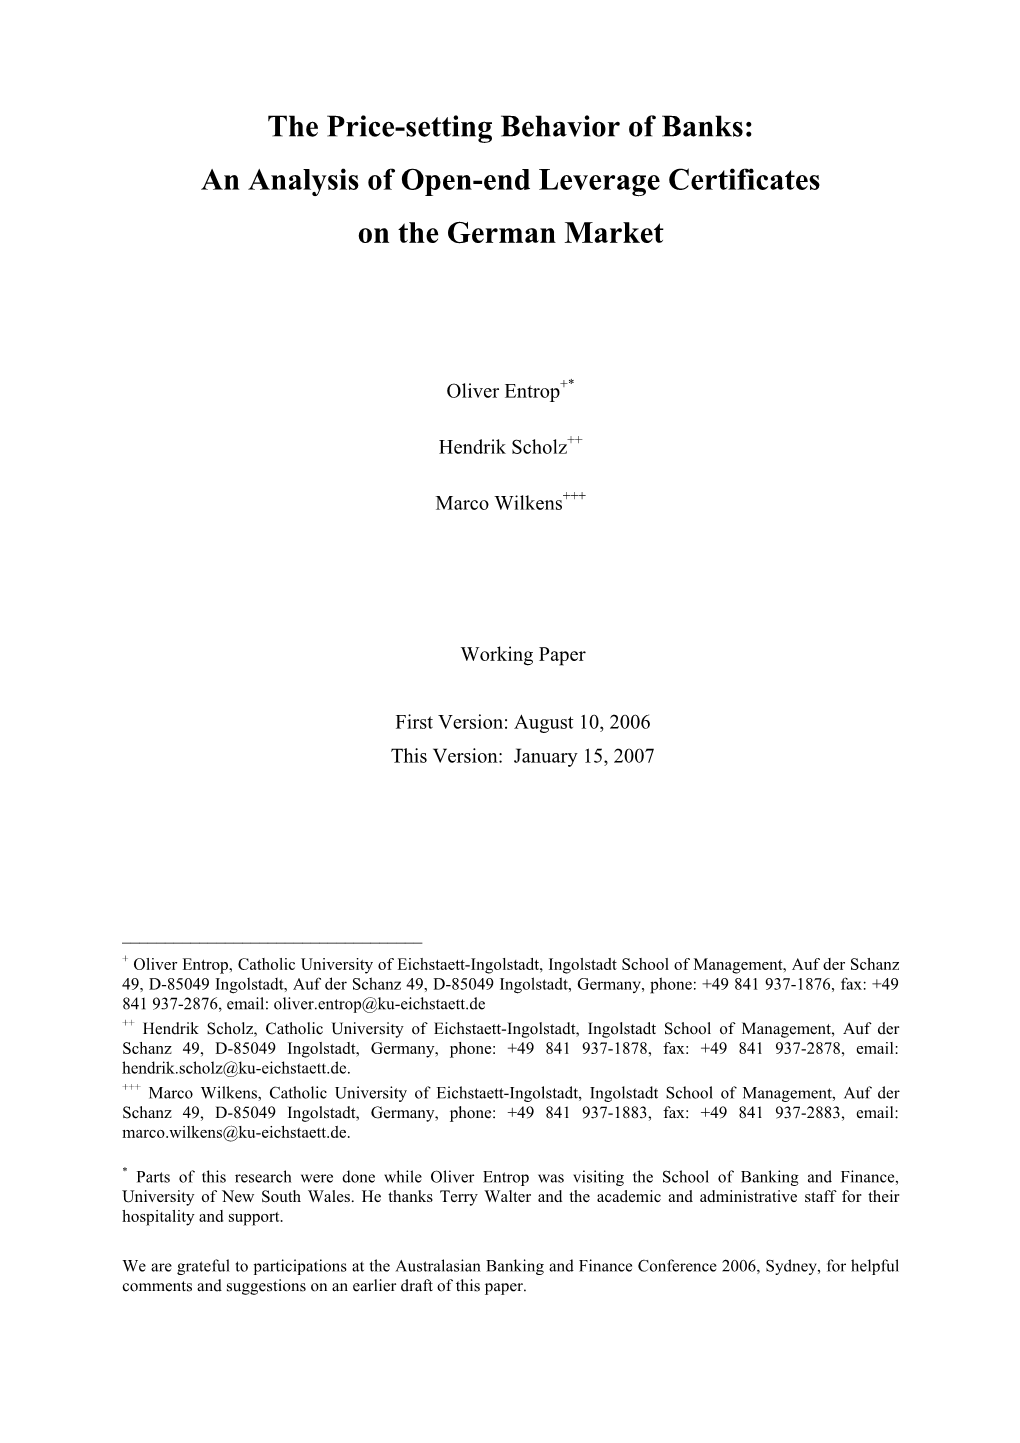 An Analysis of Open-End Leverage Certificates on the German Market